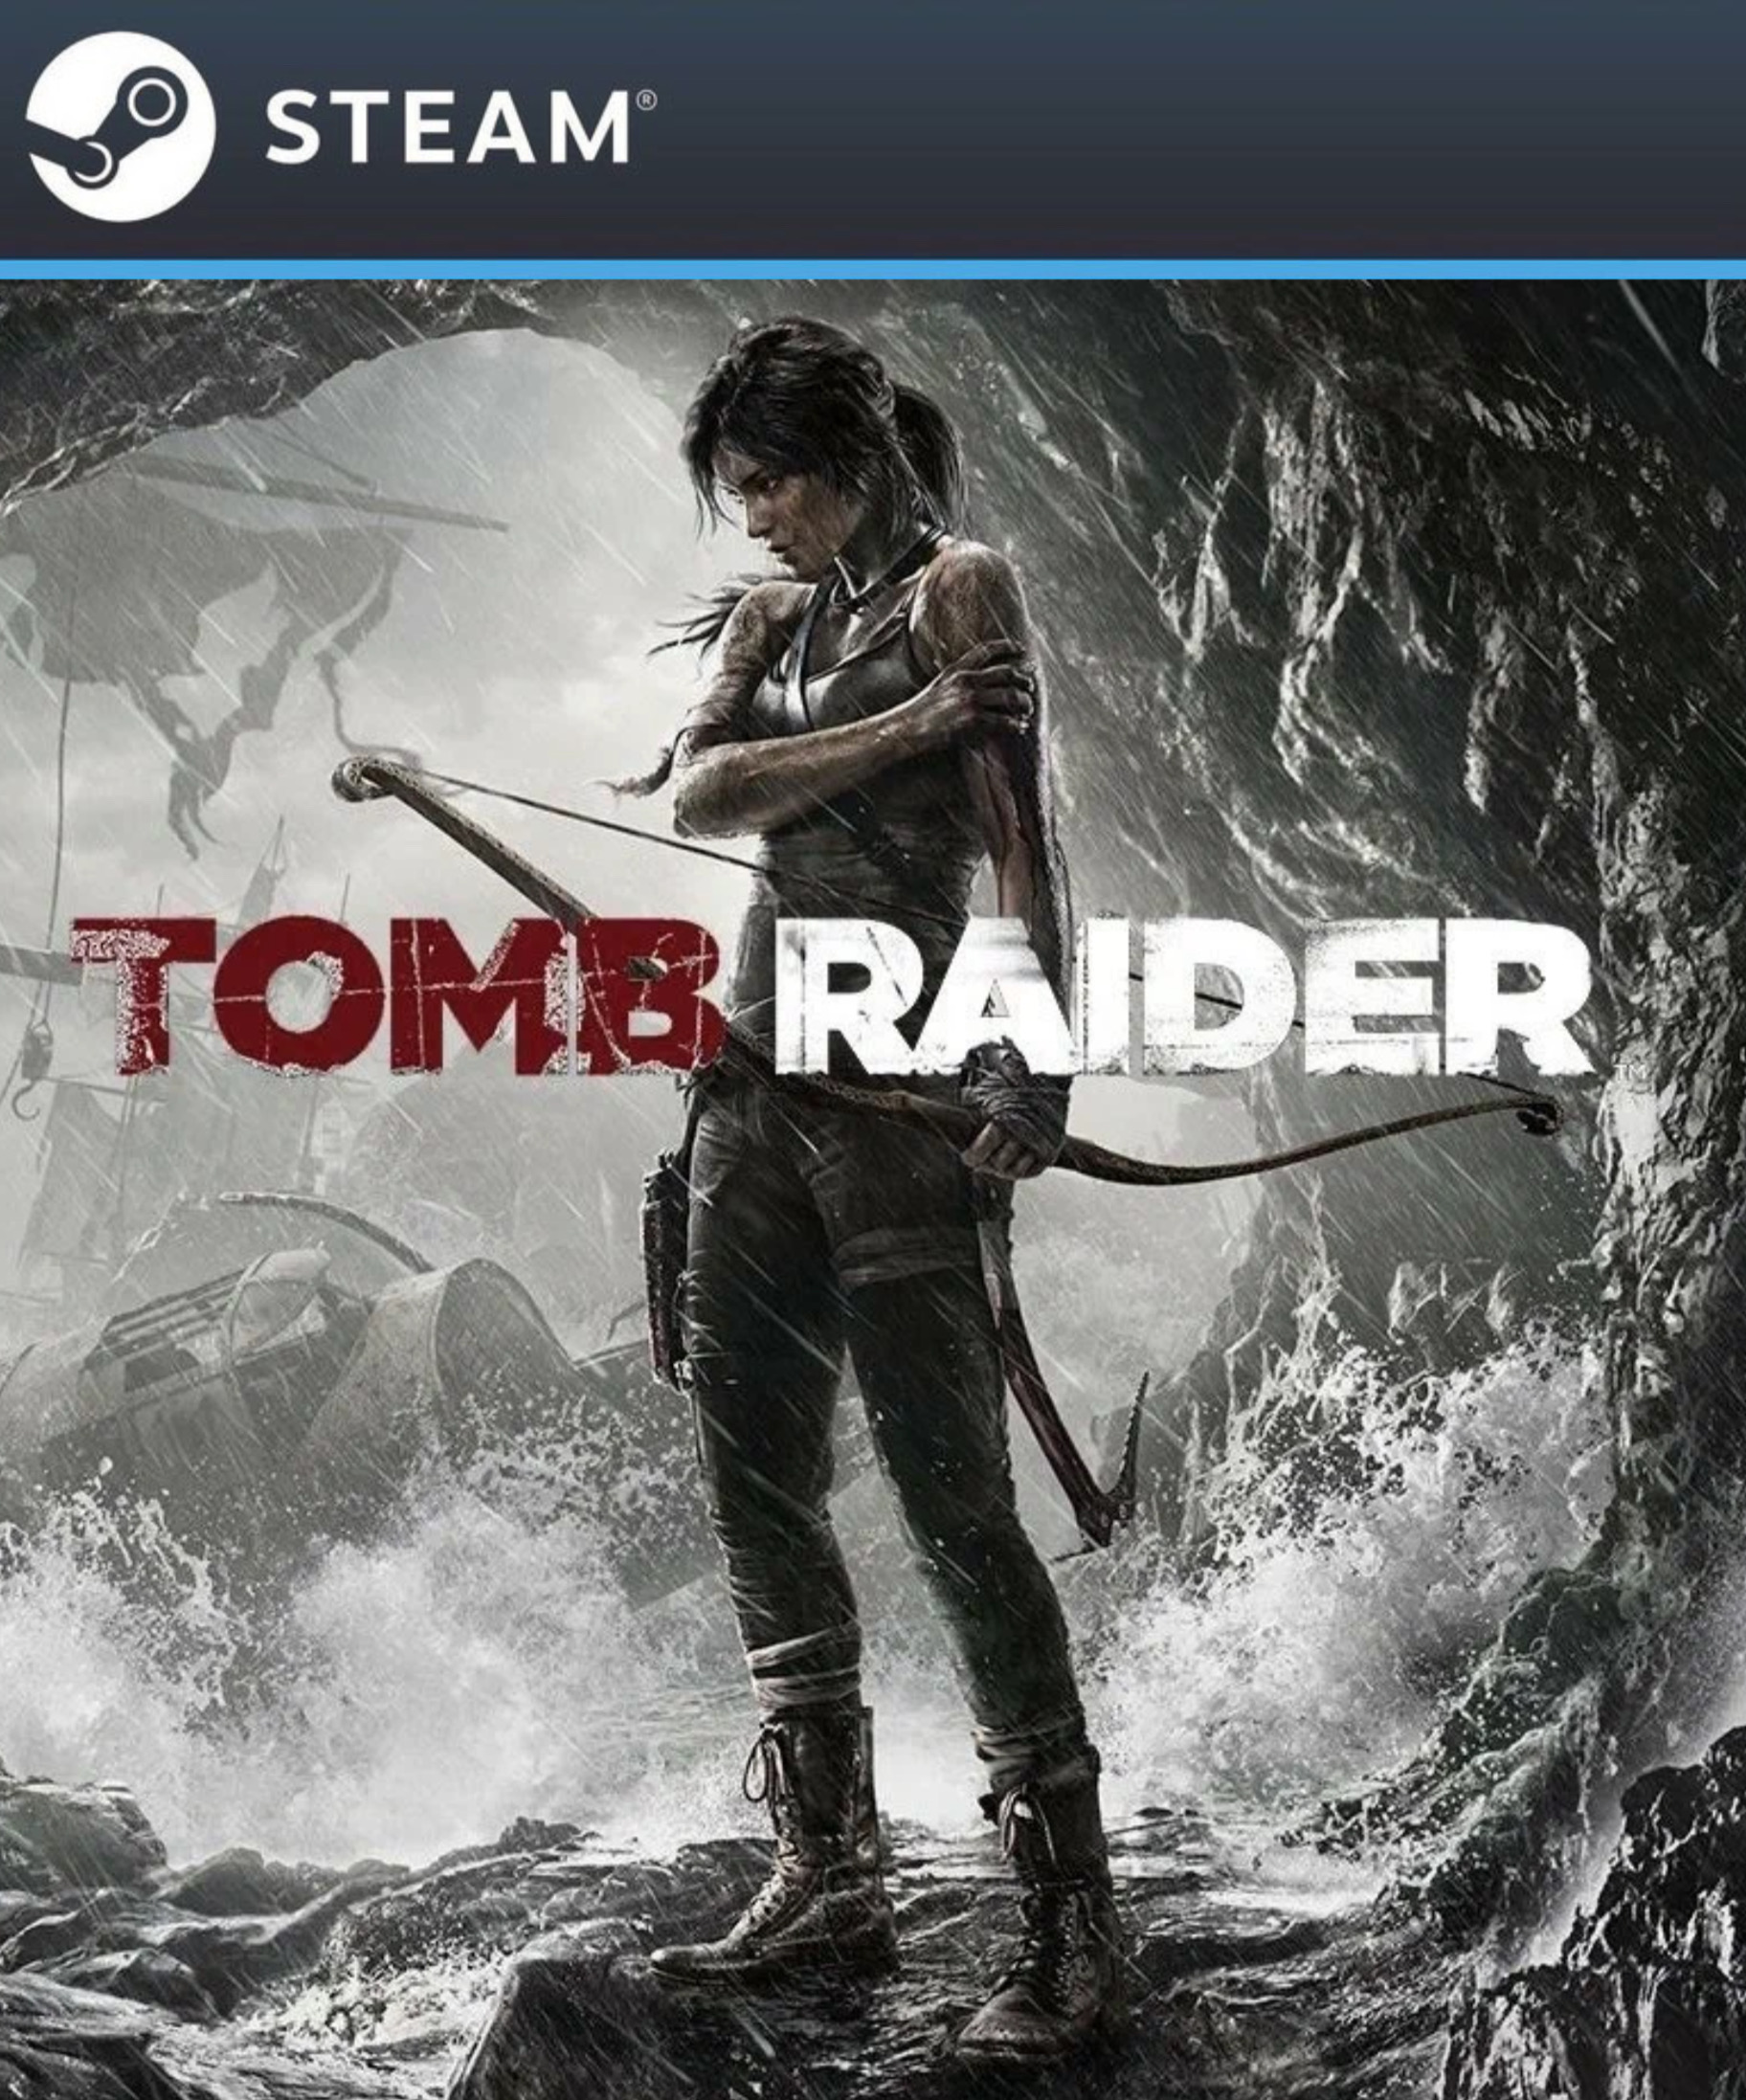 Tomb raider for steam фото 3